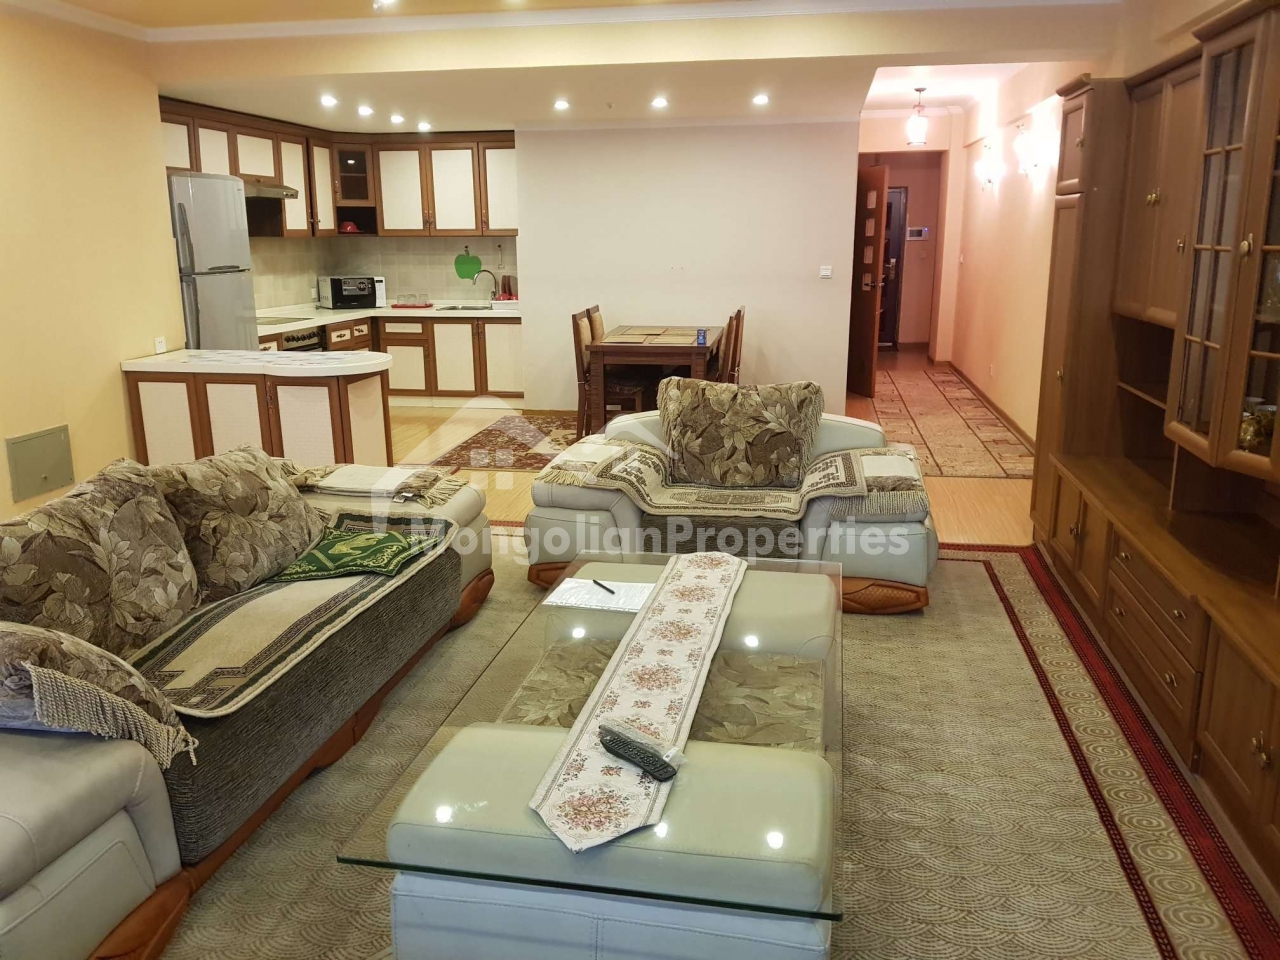 For Rent: 3 BEDROOM APARTMENT IS FOR RENT AT BEHIND MUNGUN ZAVIYA